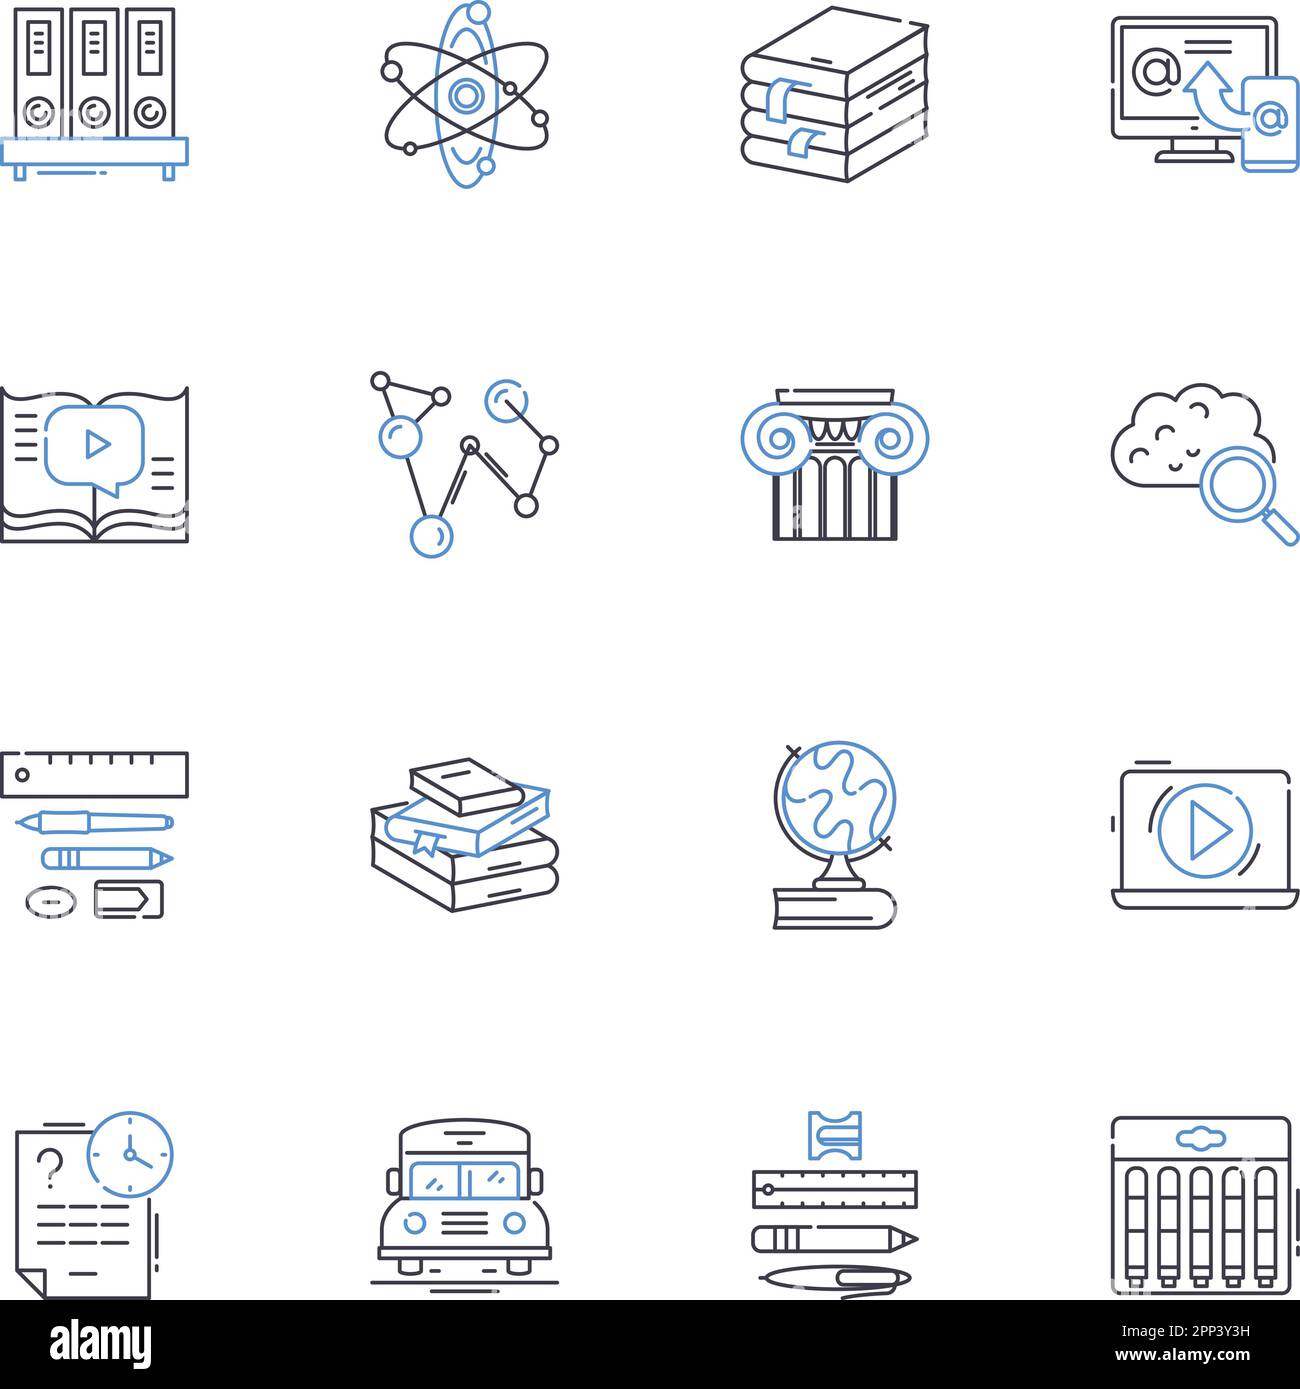 Magnet school line icons collection. Curriculum, Specialization, Magnetism, Admission, Diversity, Magnetized, Technological vector and linear Stock Vector